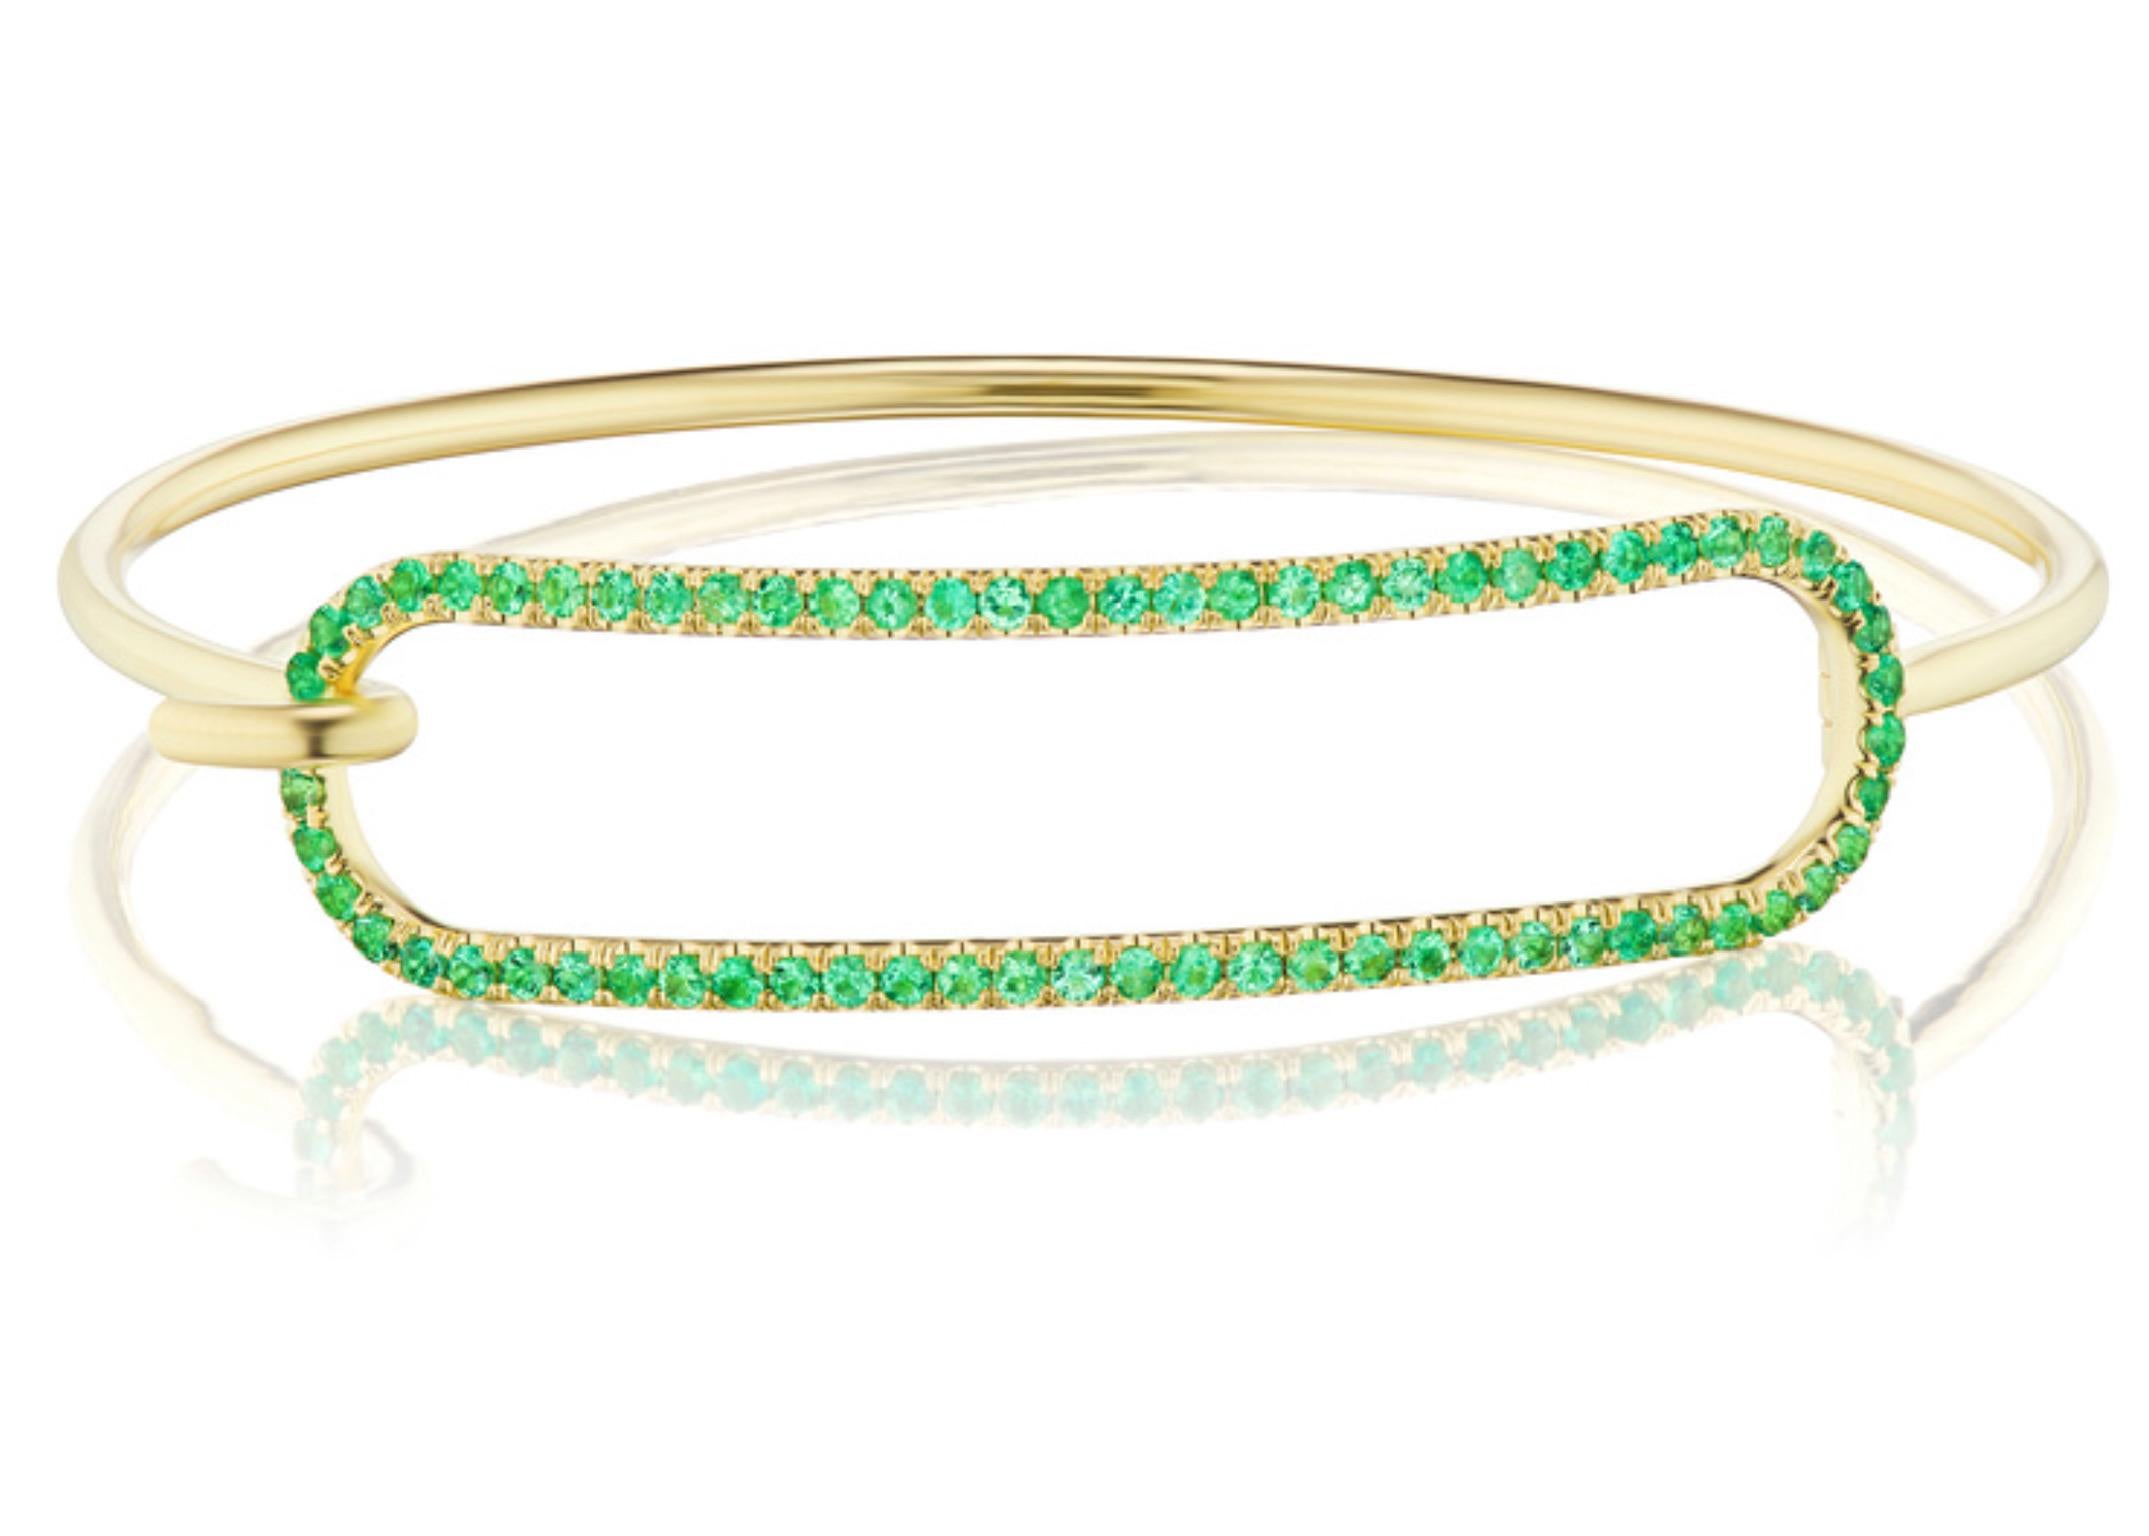 Andrew Glassford's signature 2mm Emerald Tension Bracelet in 18K yellow gold with .98 carats of round Emeralds that creates a stunning 